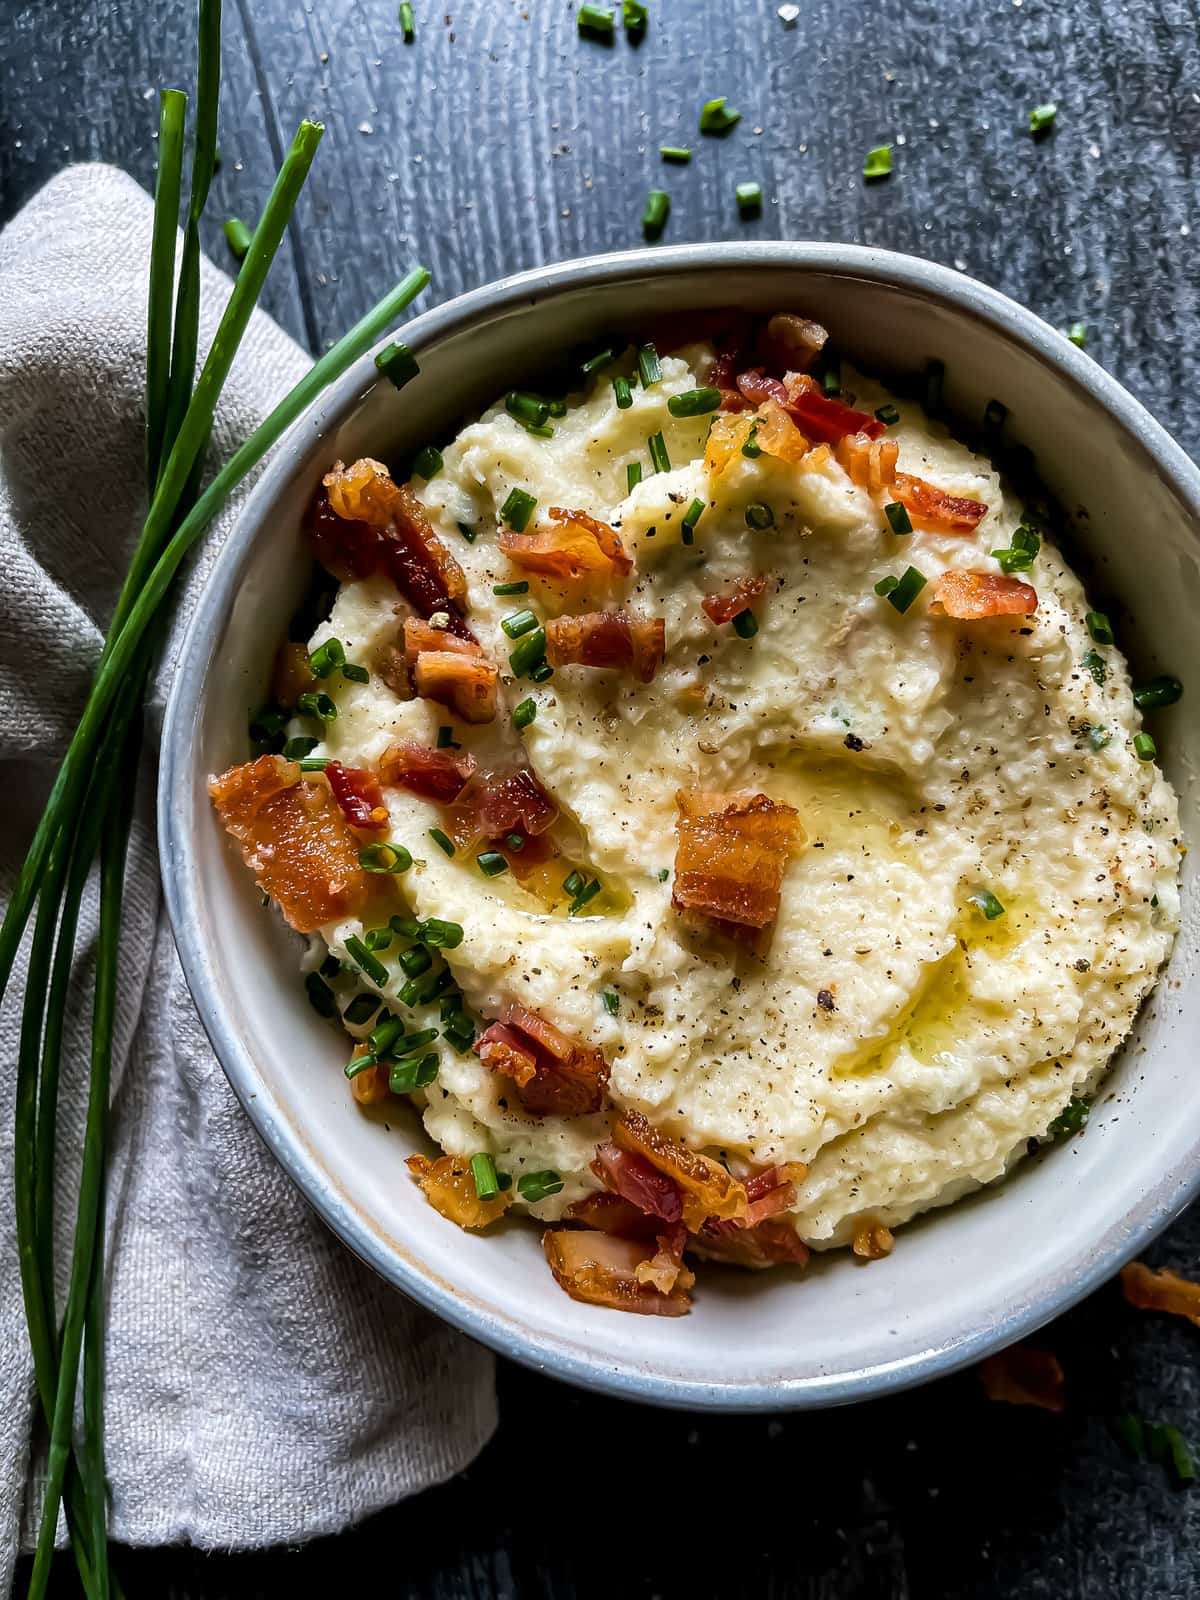 mashed cauliflower garnished with chives, bacon